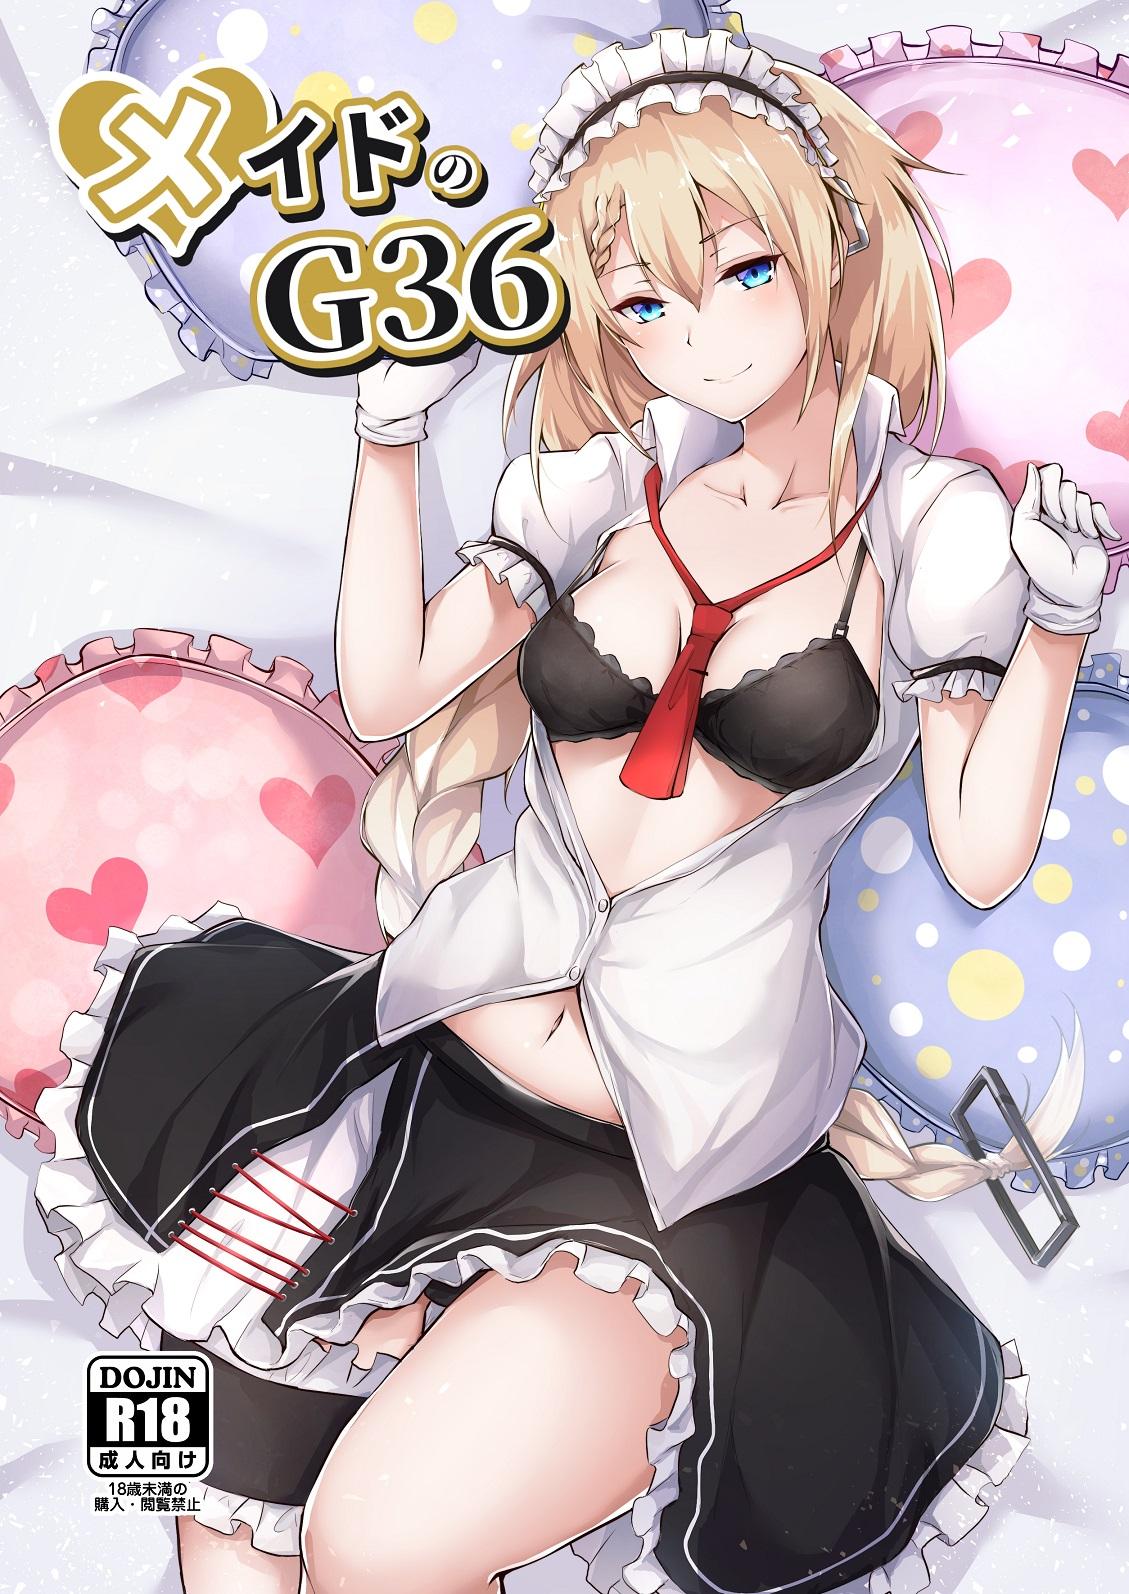 Jacking Maid no G36 - Girls frontline Butts - Picture 1